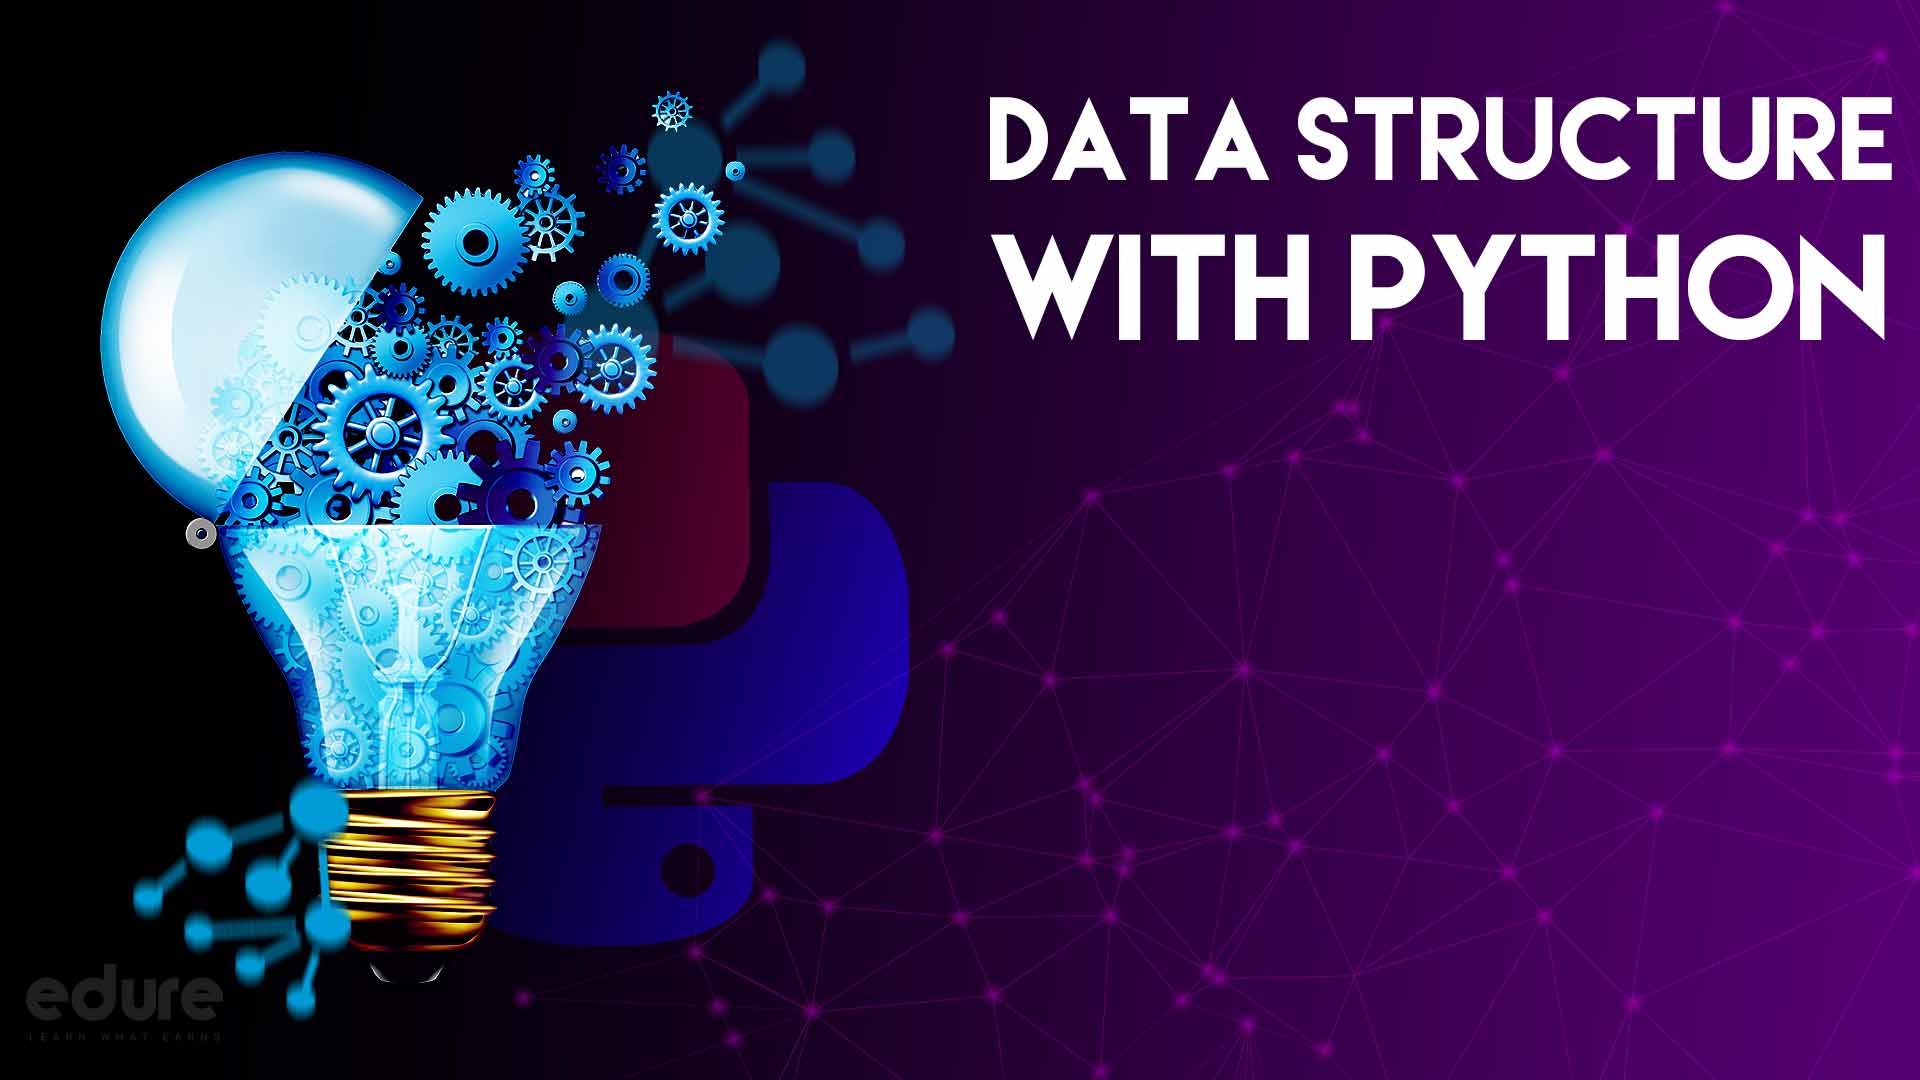 Data structure with Python